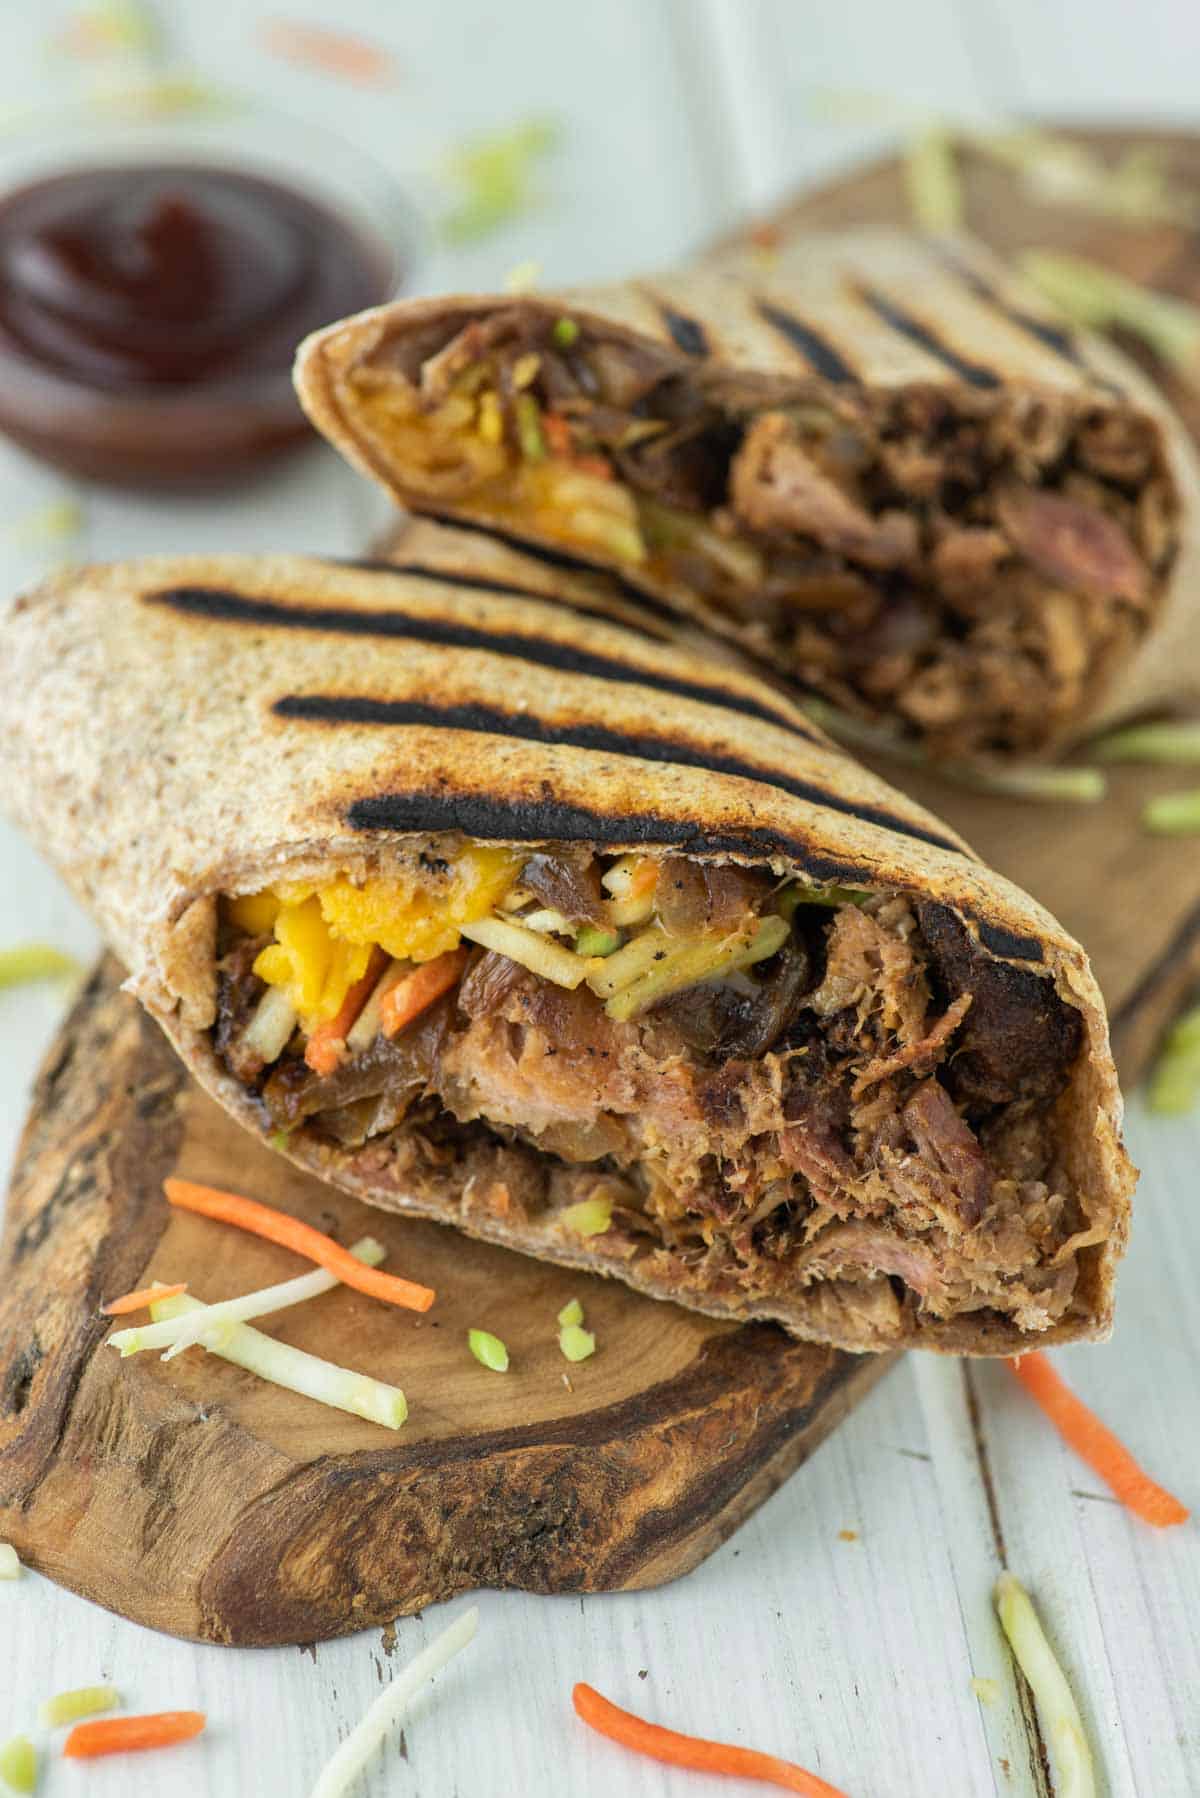 Two halved grilled wrap sandwiches containing shredded meat and vegetables are situated on a wooden board, accompanied by a side of sauce and sprinkled with finely chopped vegetables.